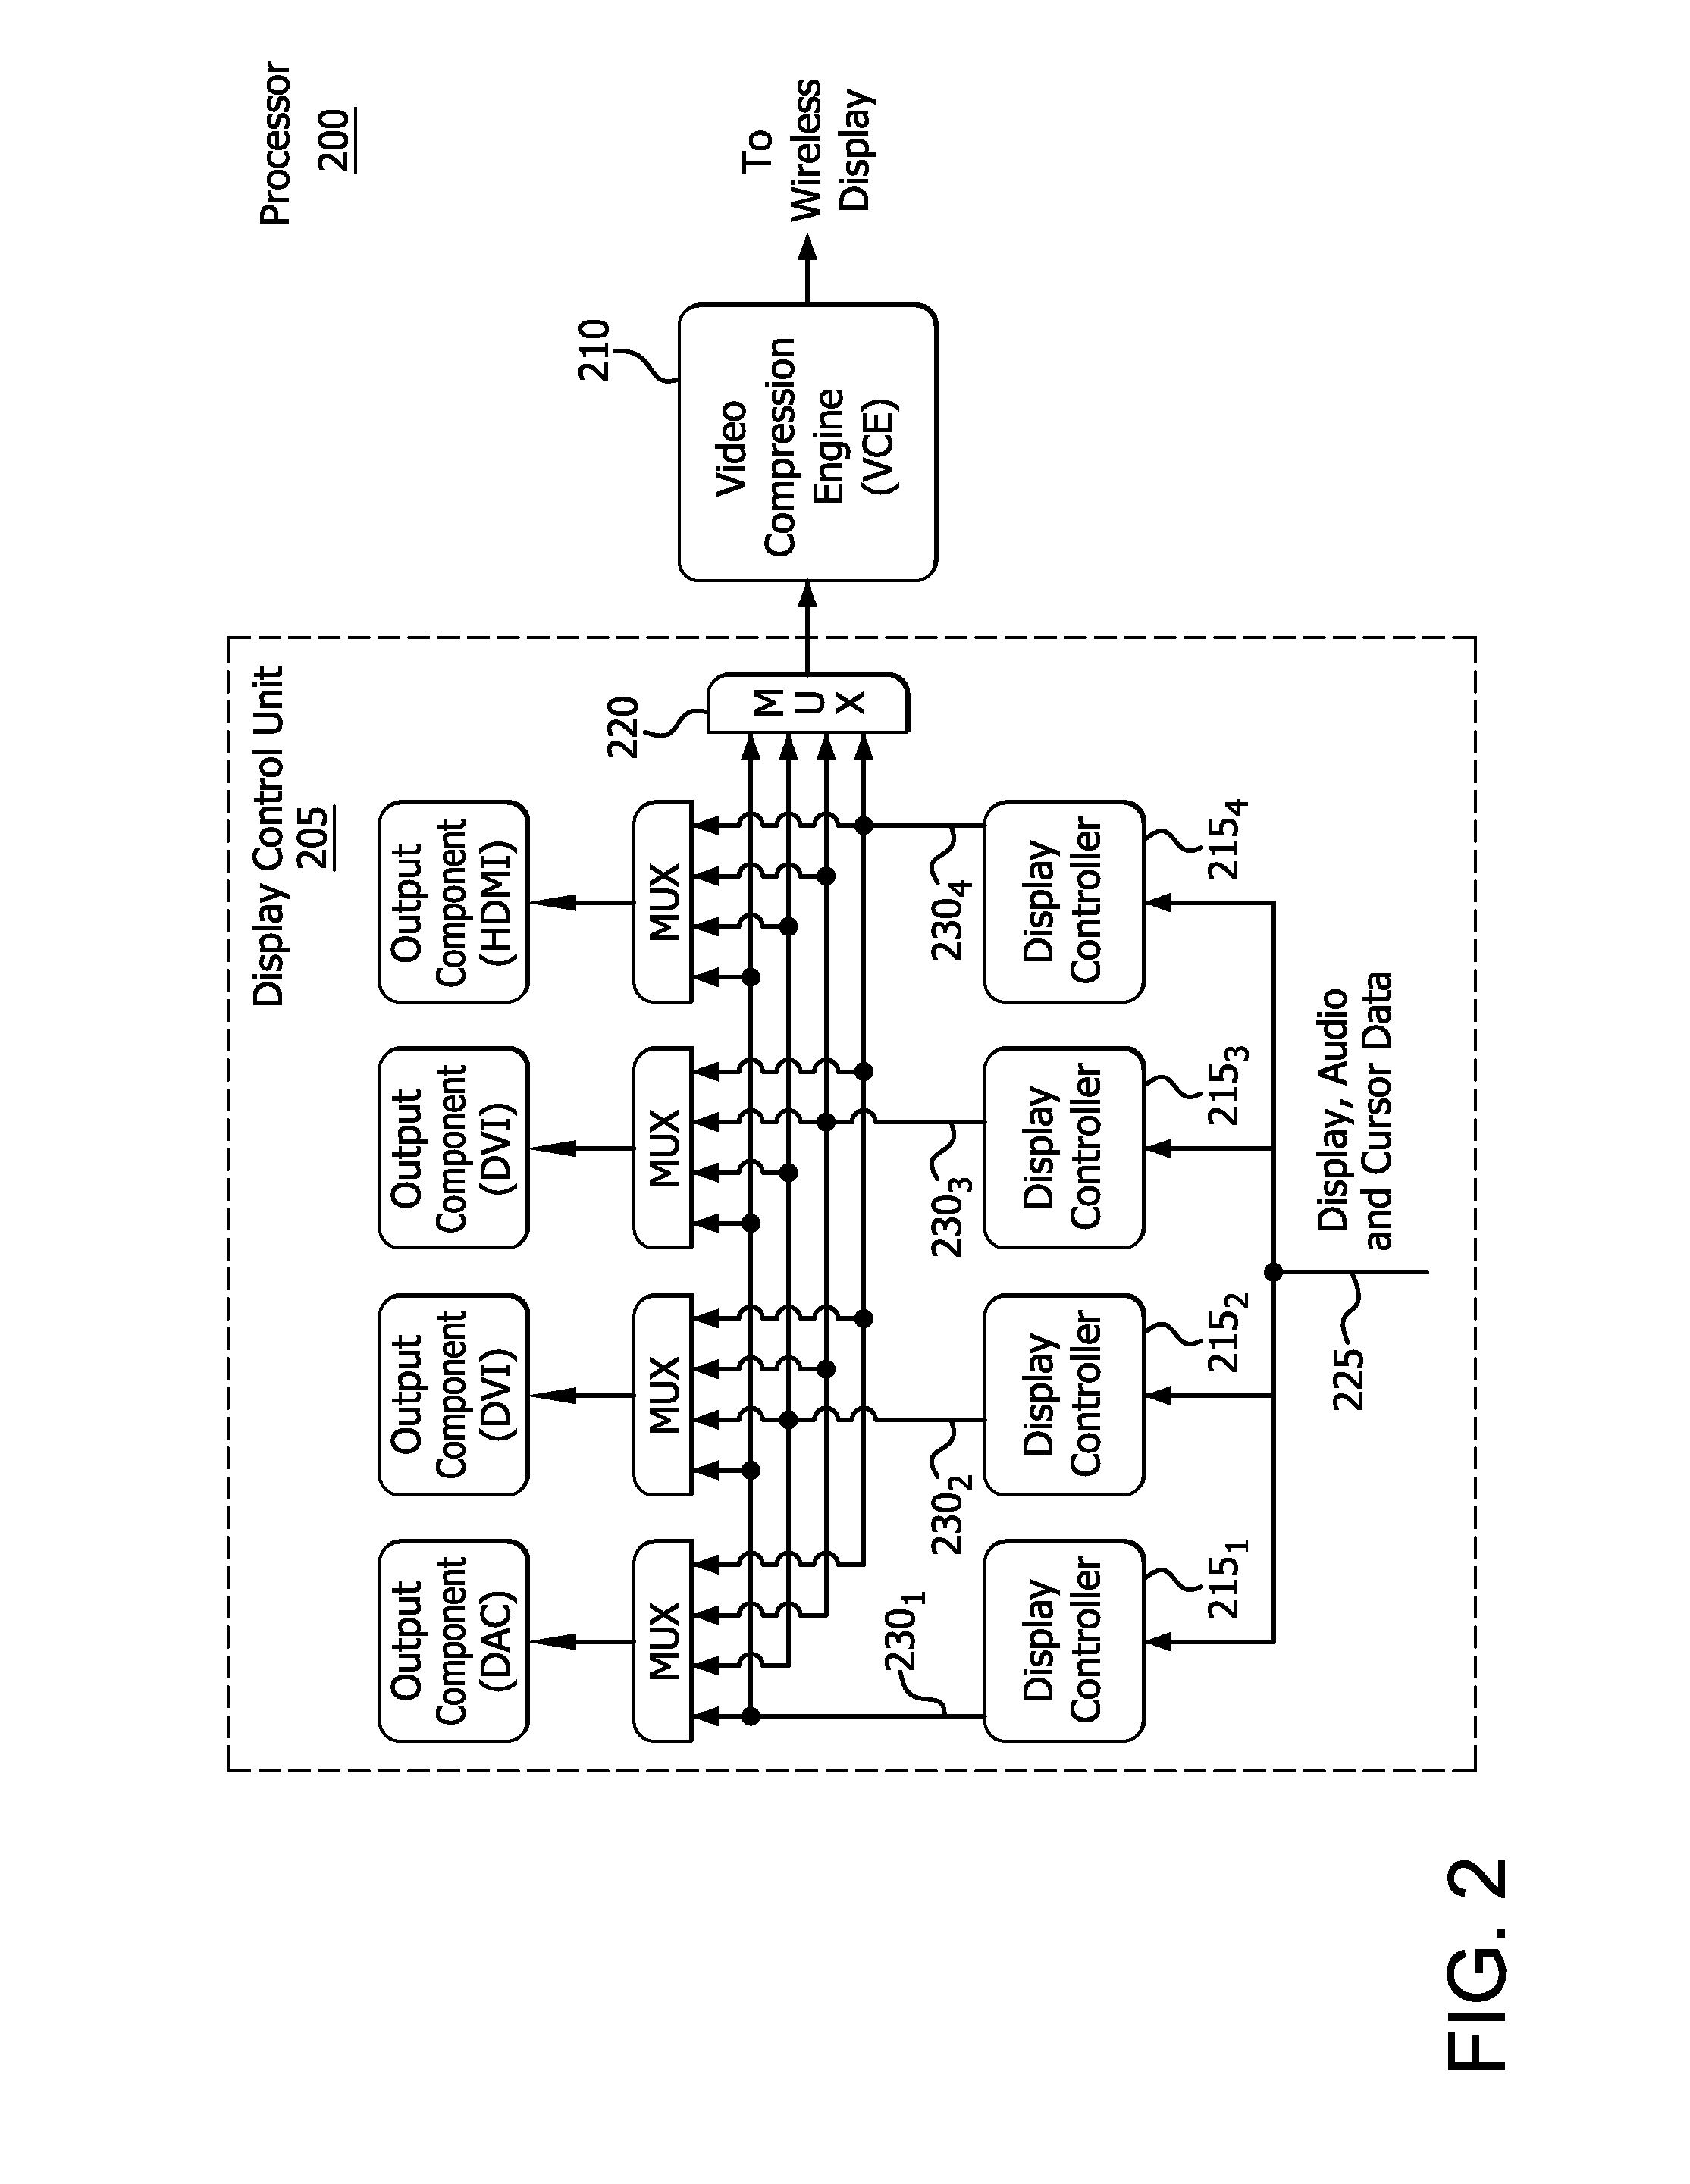 Method and apparatus for generating a display data stream for transmission to a remote display